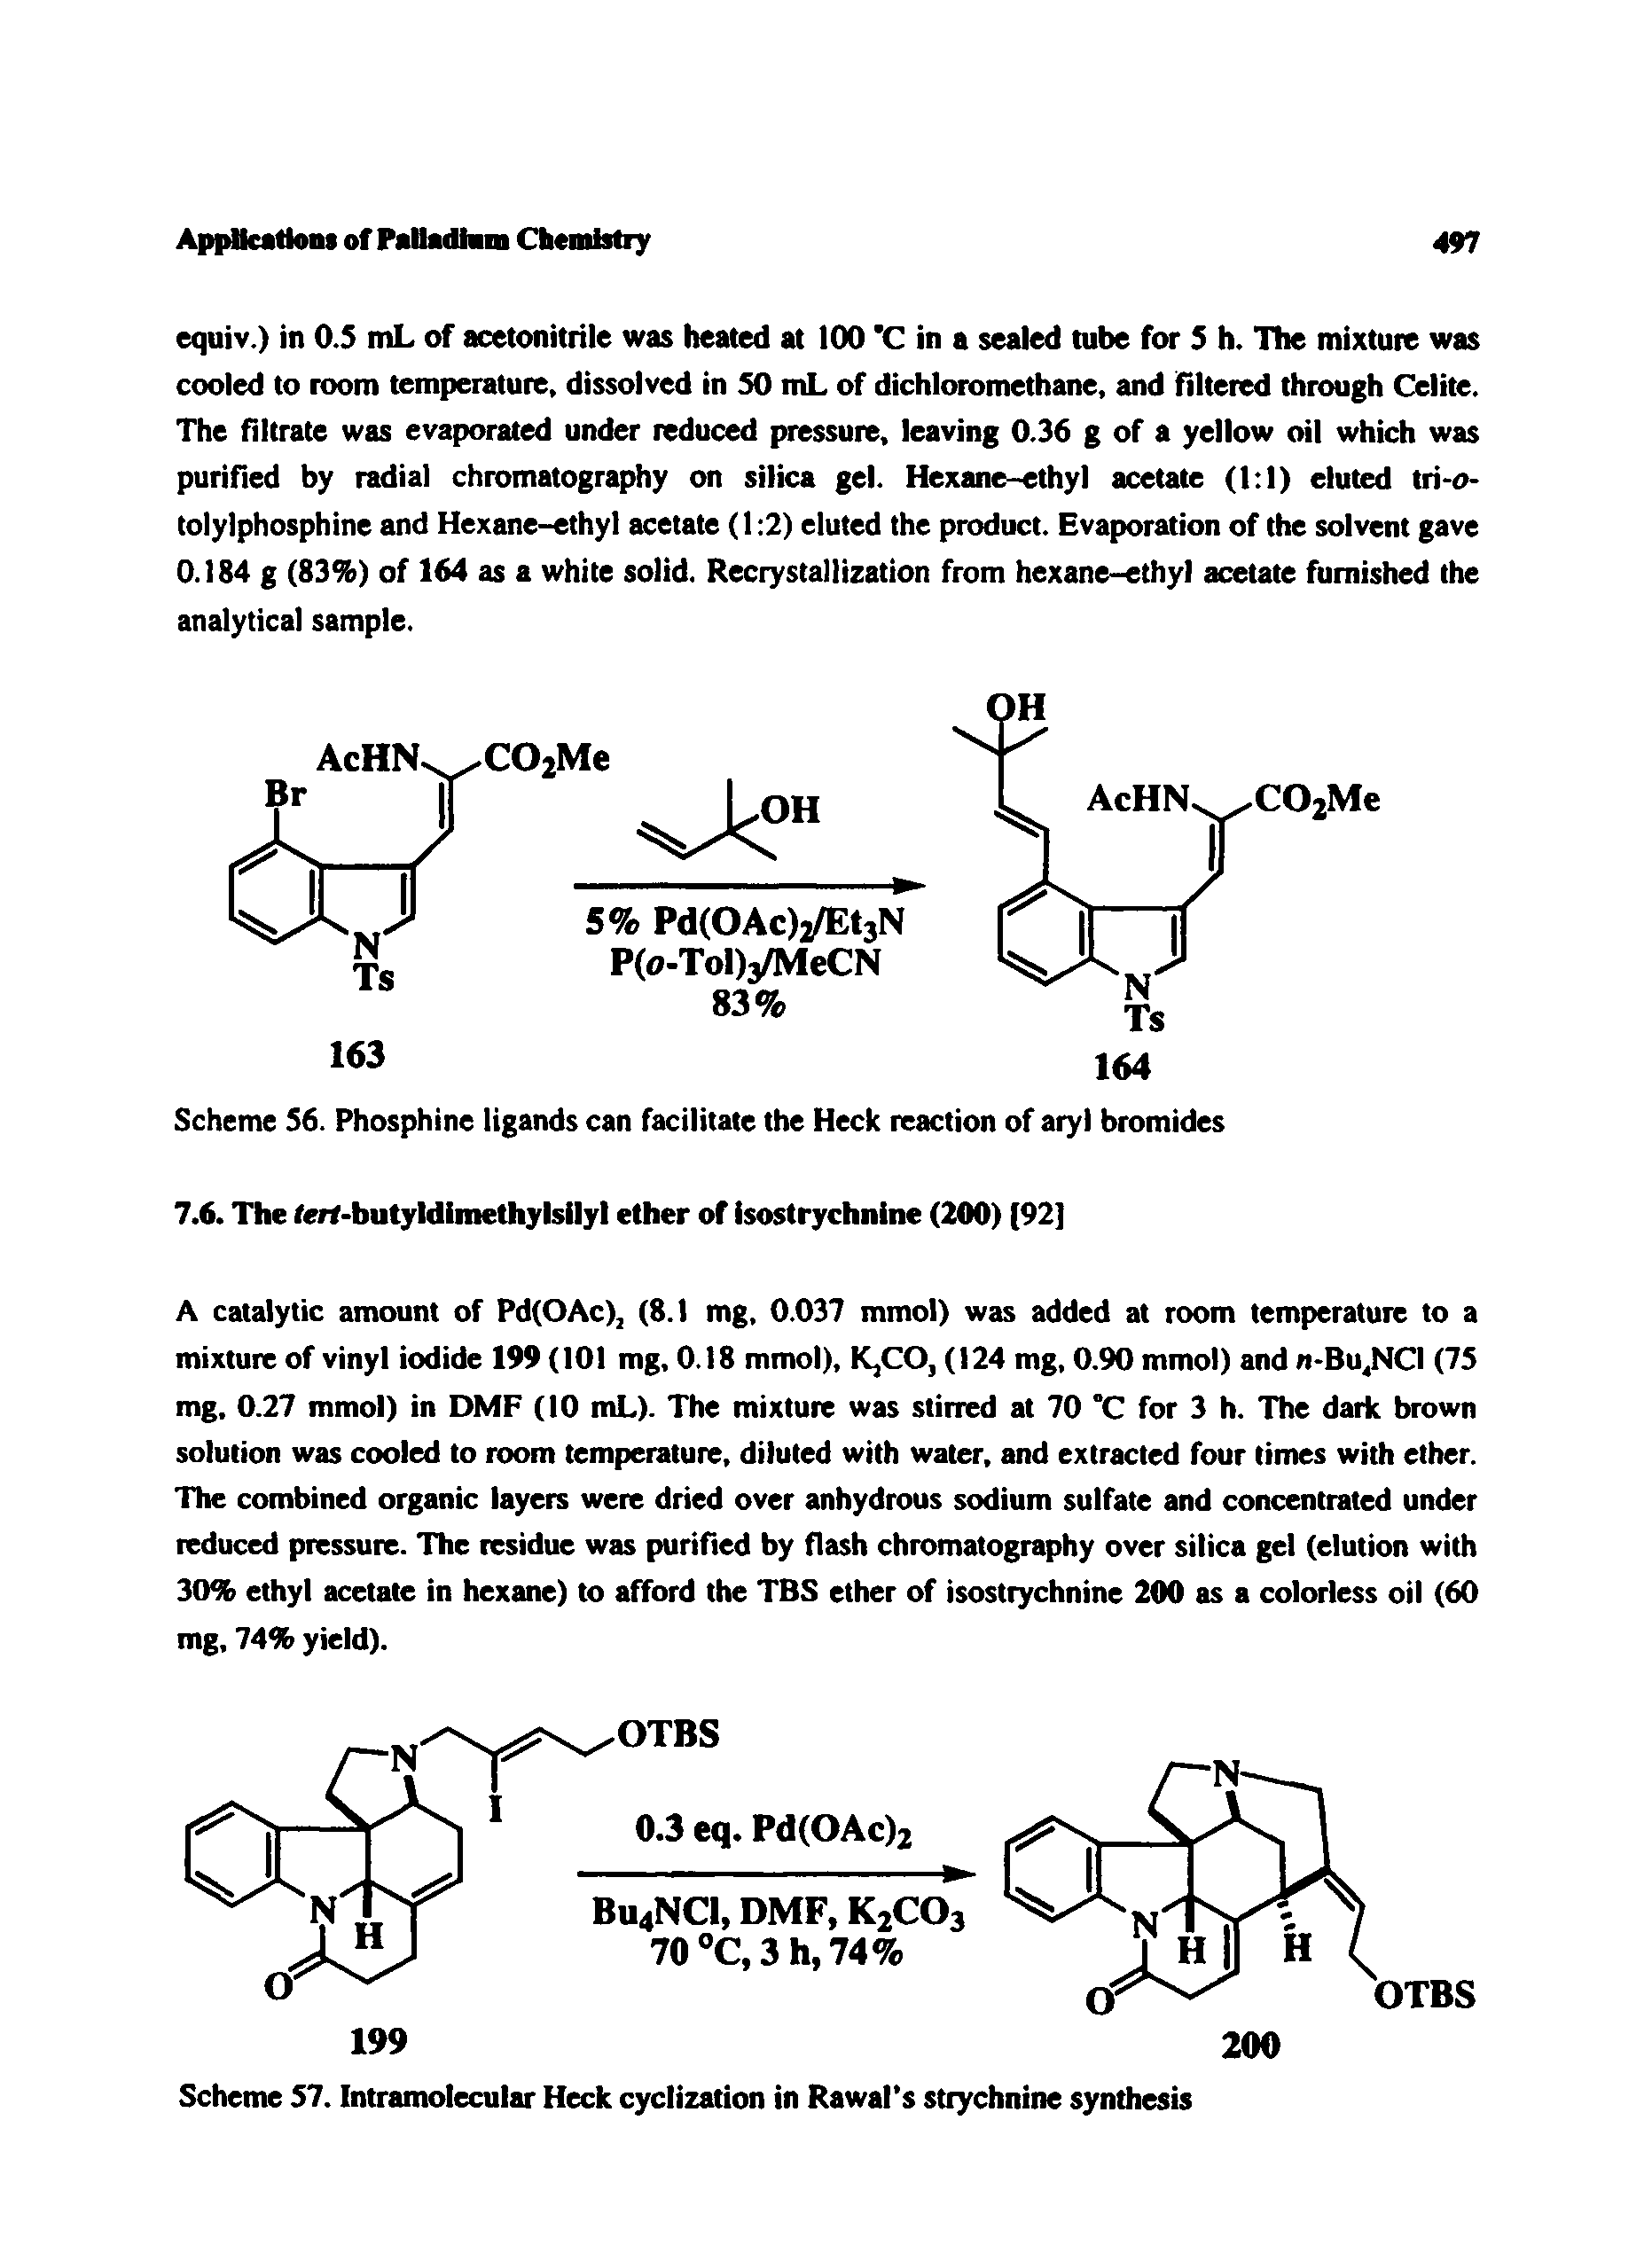 Scheme 57. Intramolecular Heck cyclization in Rawal s strychnine synthesis...